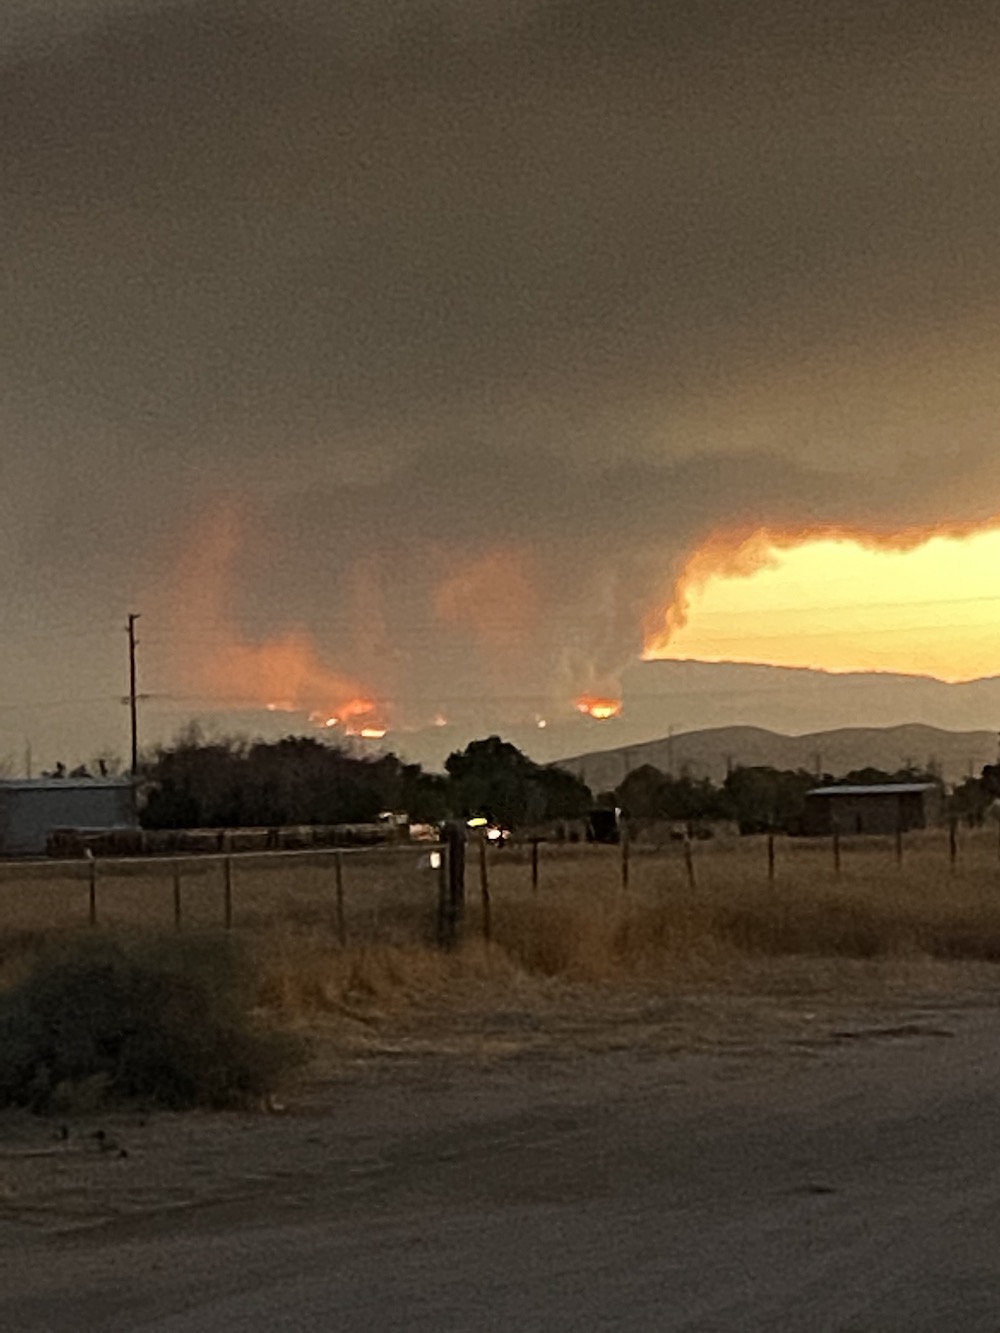 "Lake Fire" to the southwest